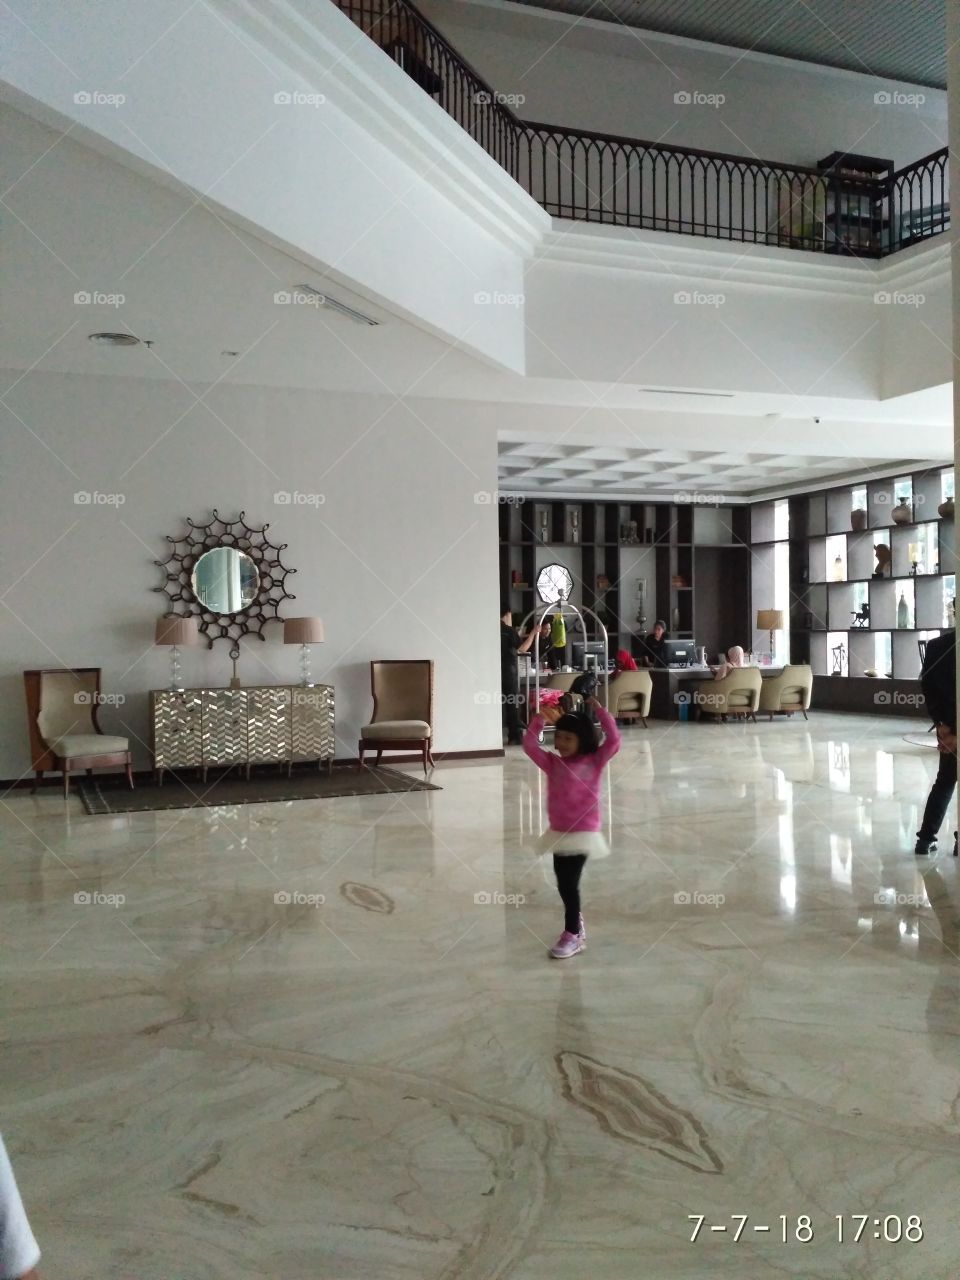 Dancing and spinning on the spacious room waiting for the bellboy to come xD